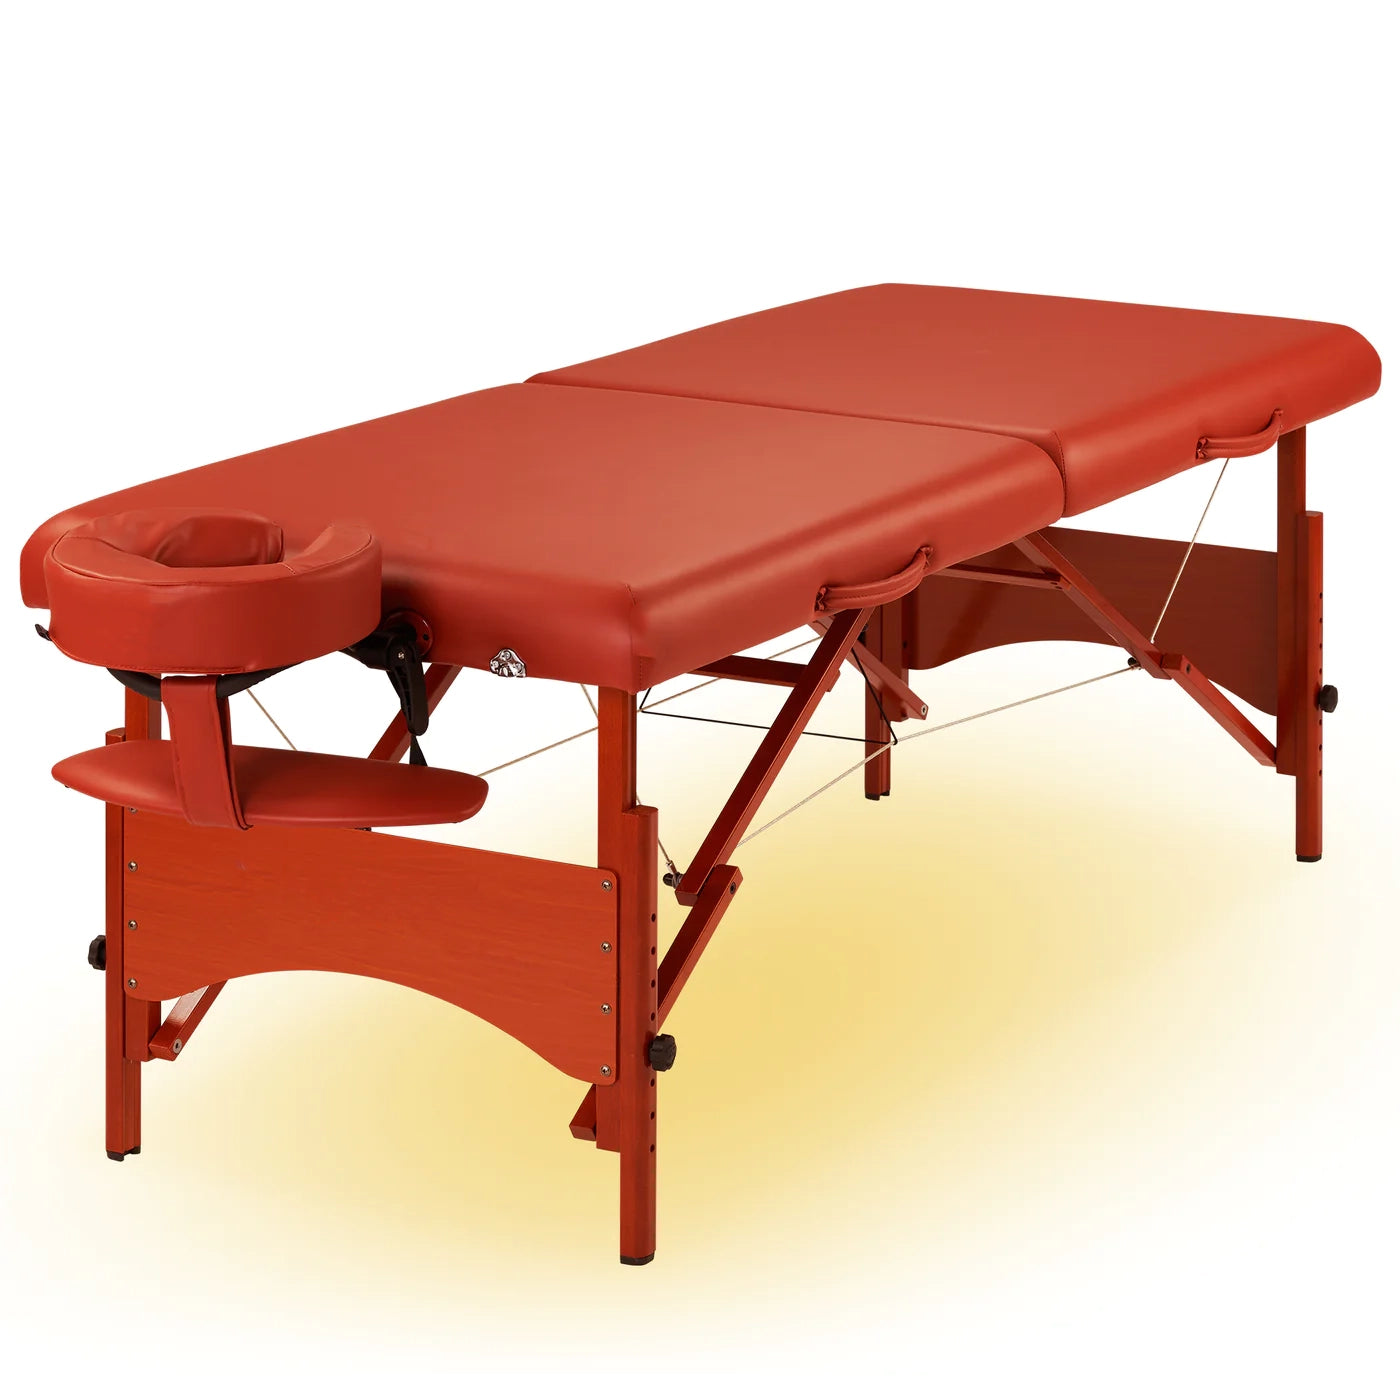 Bella2bello 31" SANTANA™ Portable Massage Table Package with Therma-Top®-Adjustable Heating System, Shiatsu Cables, Reiki Panels! (Mountain Red Color)